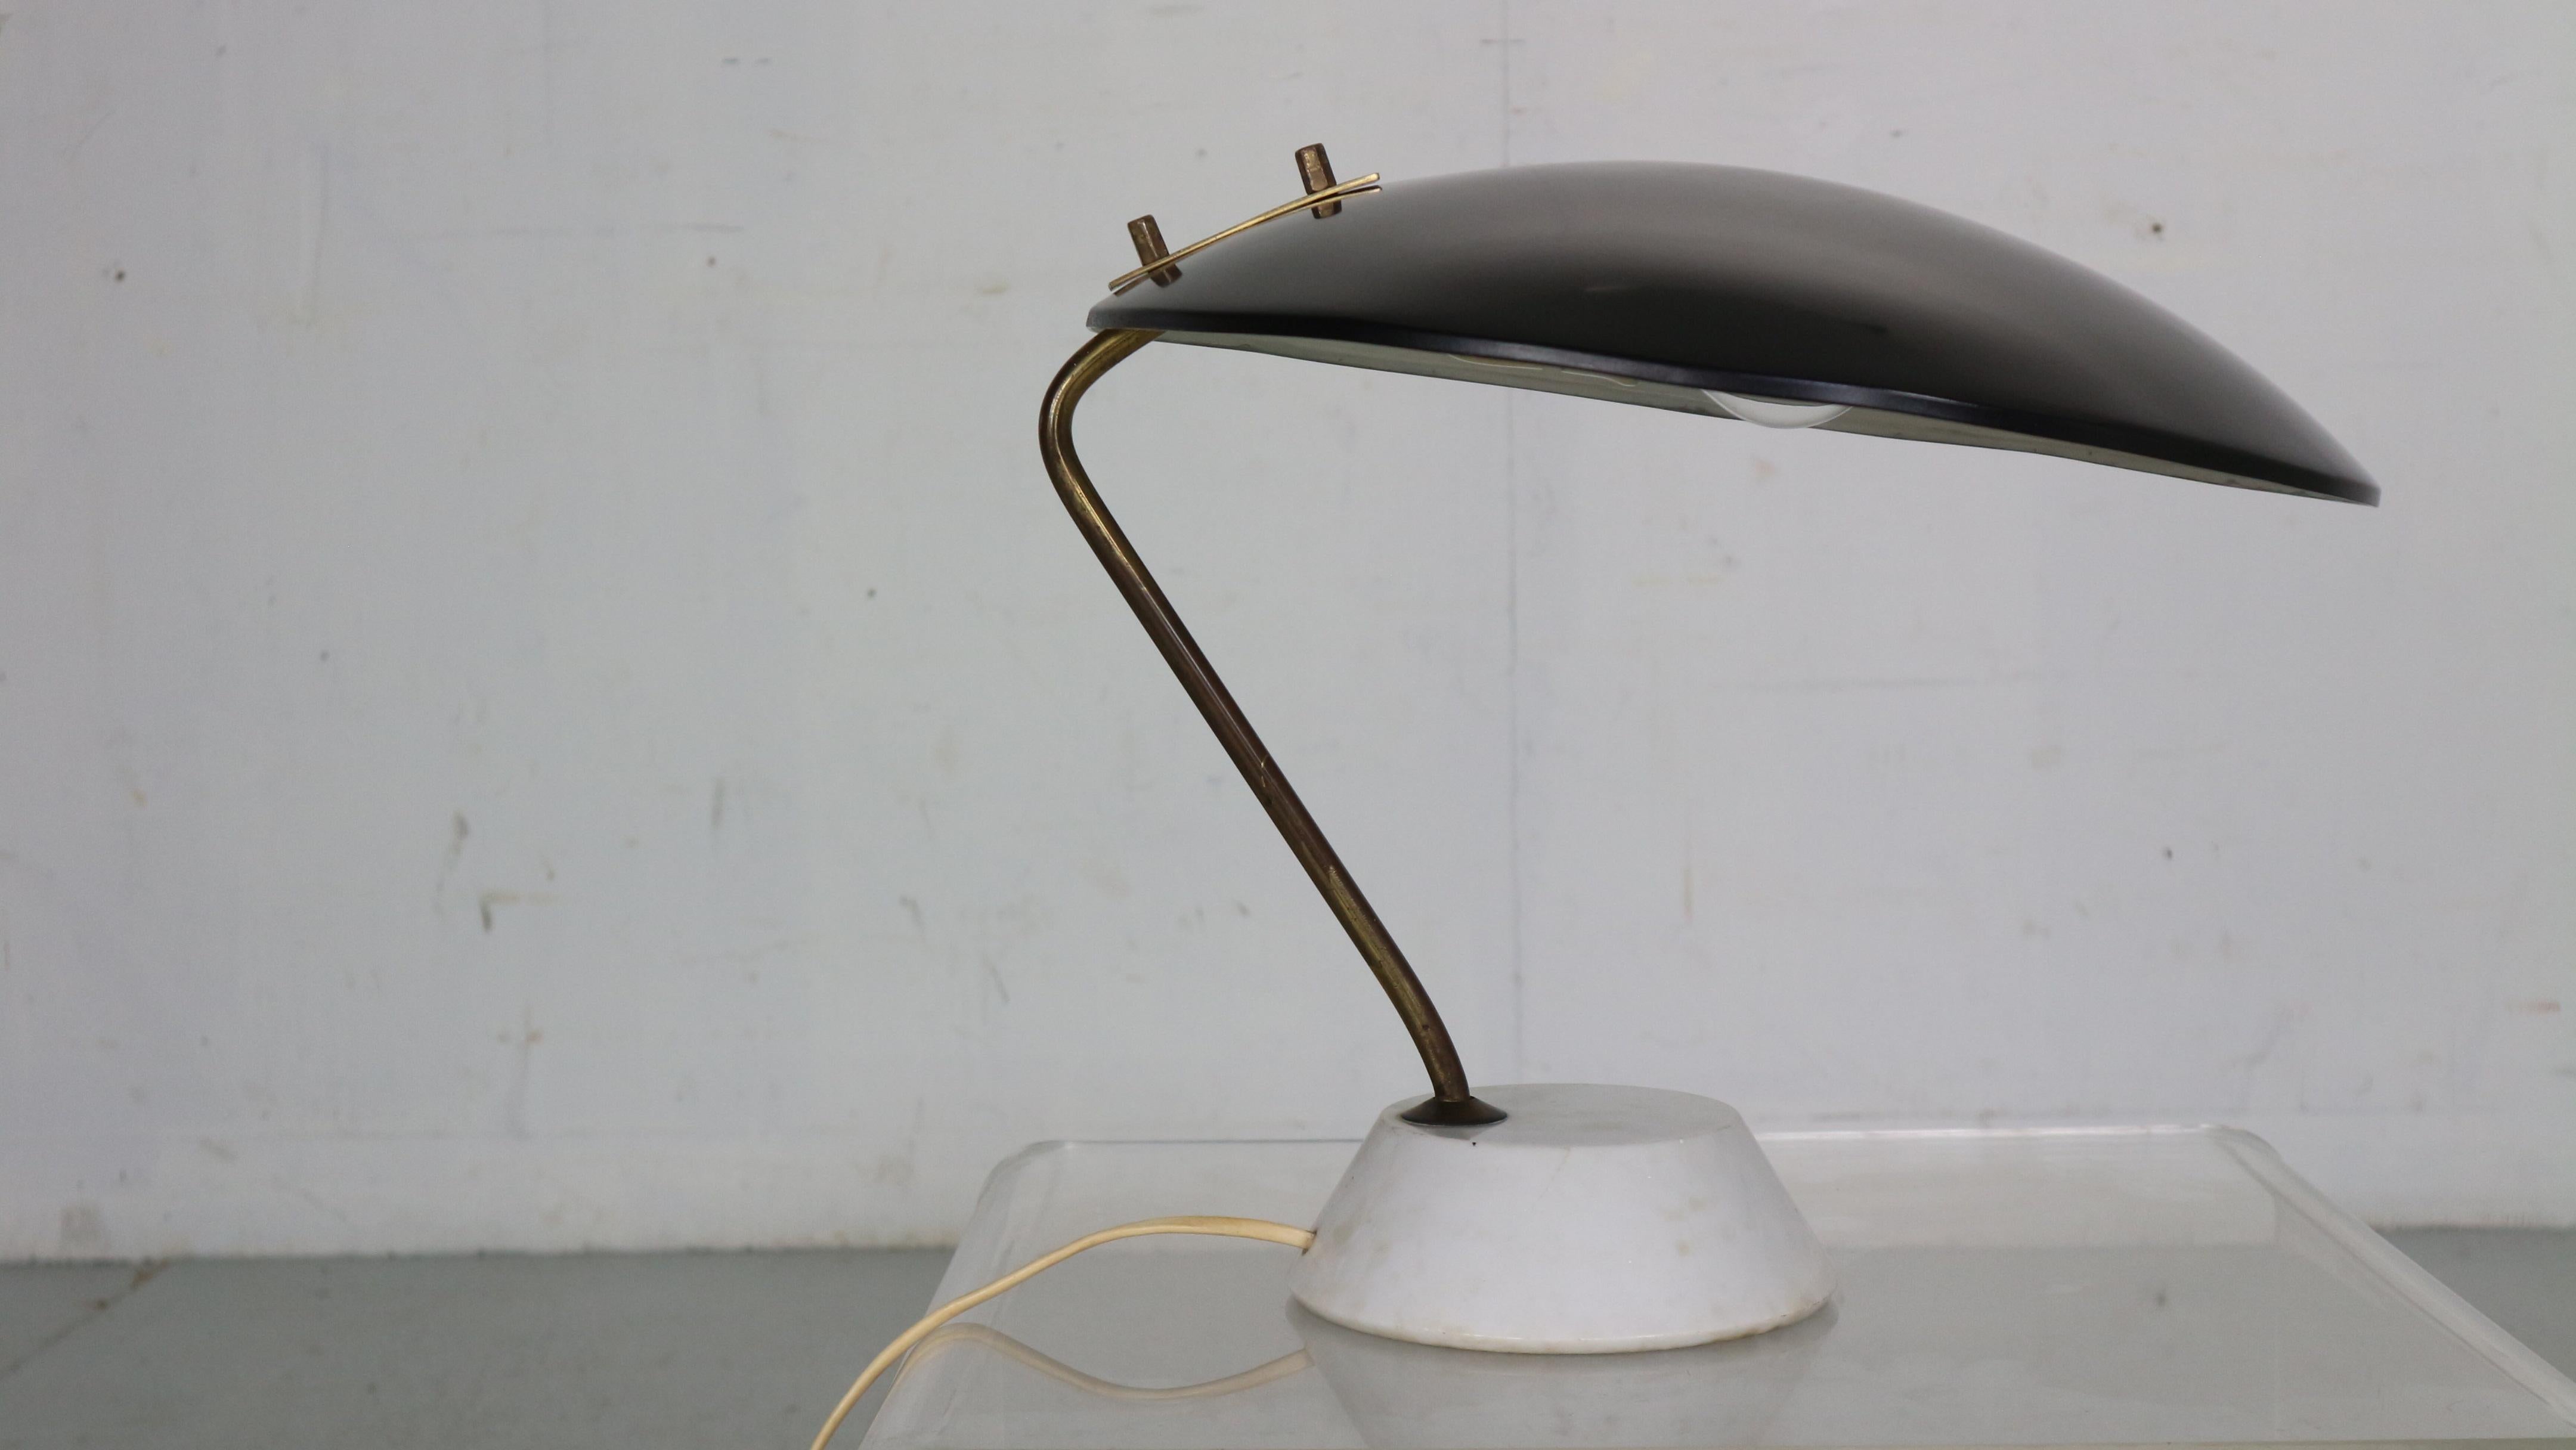 Elegant table light designed by Bruno Gatta and manufactured for Stilnovo in 1960's Italy.
This table light features a black lacquered aluminium shade with a brass rod on a white carrara marble base.

We choose for it not to polish the brass and